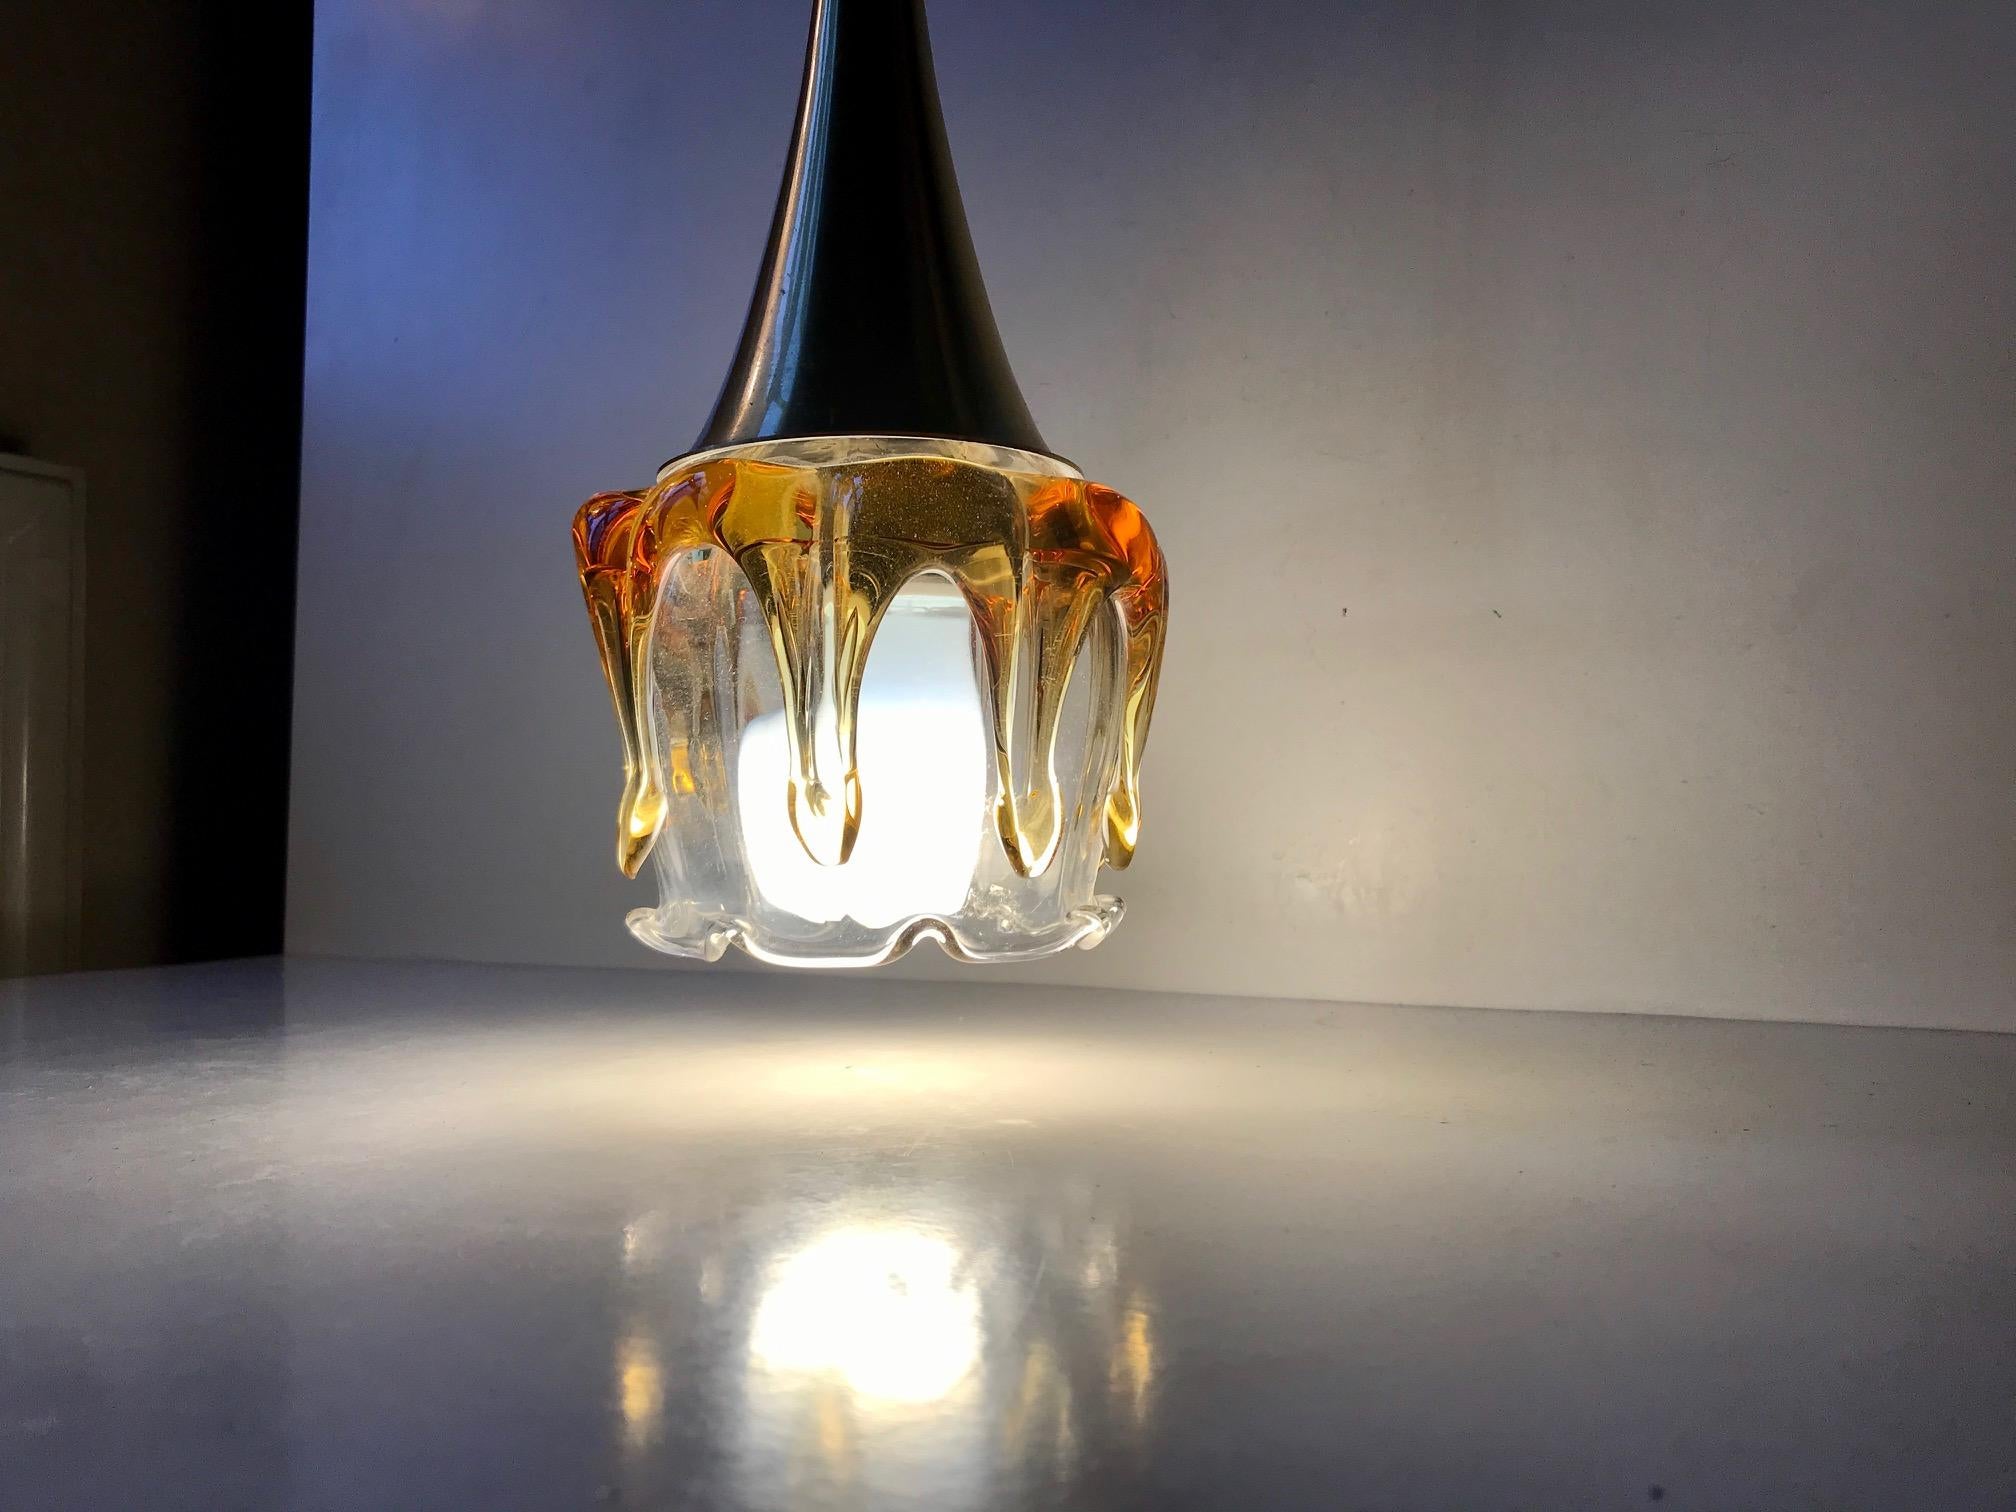 A small ice-cone shaped pendant light executed in brass-alloy aluminium and hand blown Murano glass. It was manufactured by Doria in Germany during the 1970s.